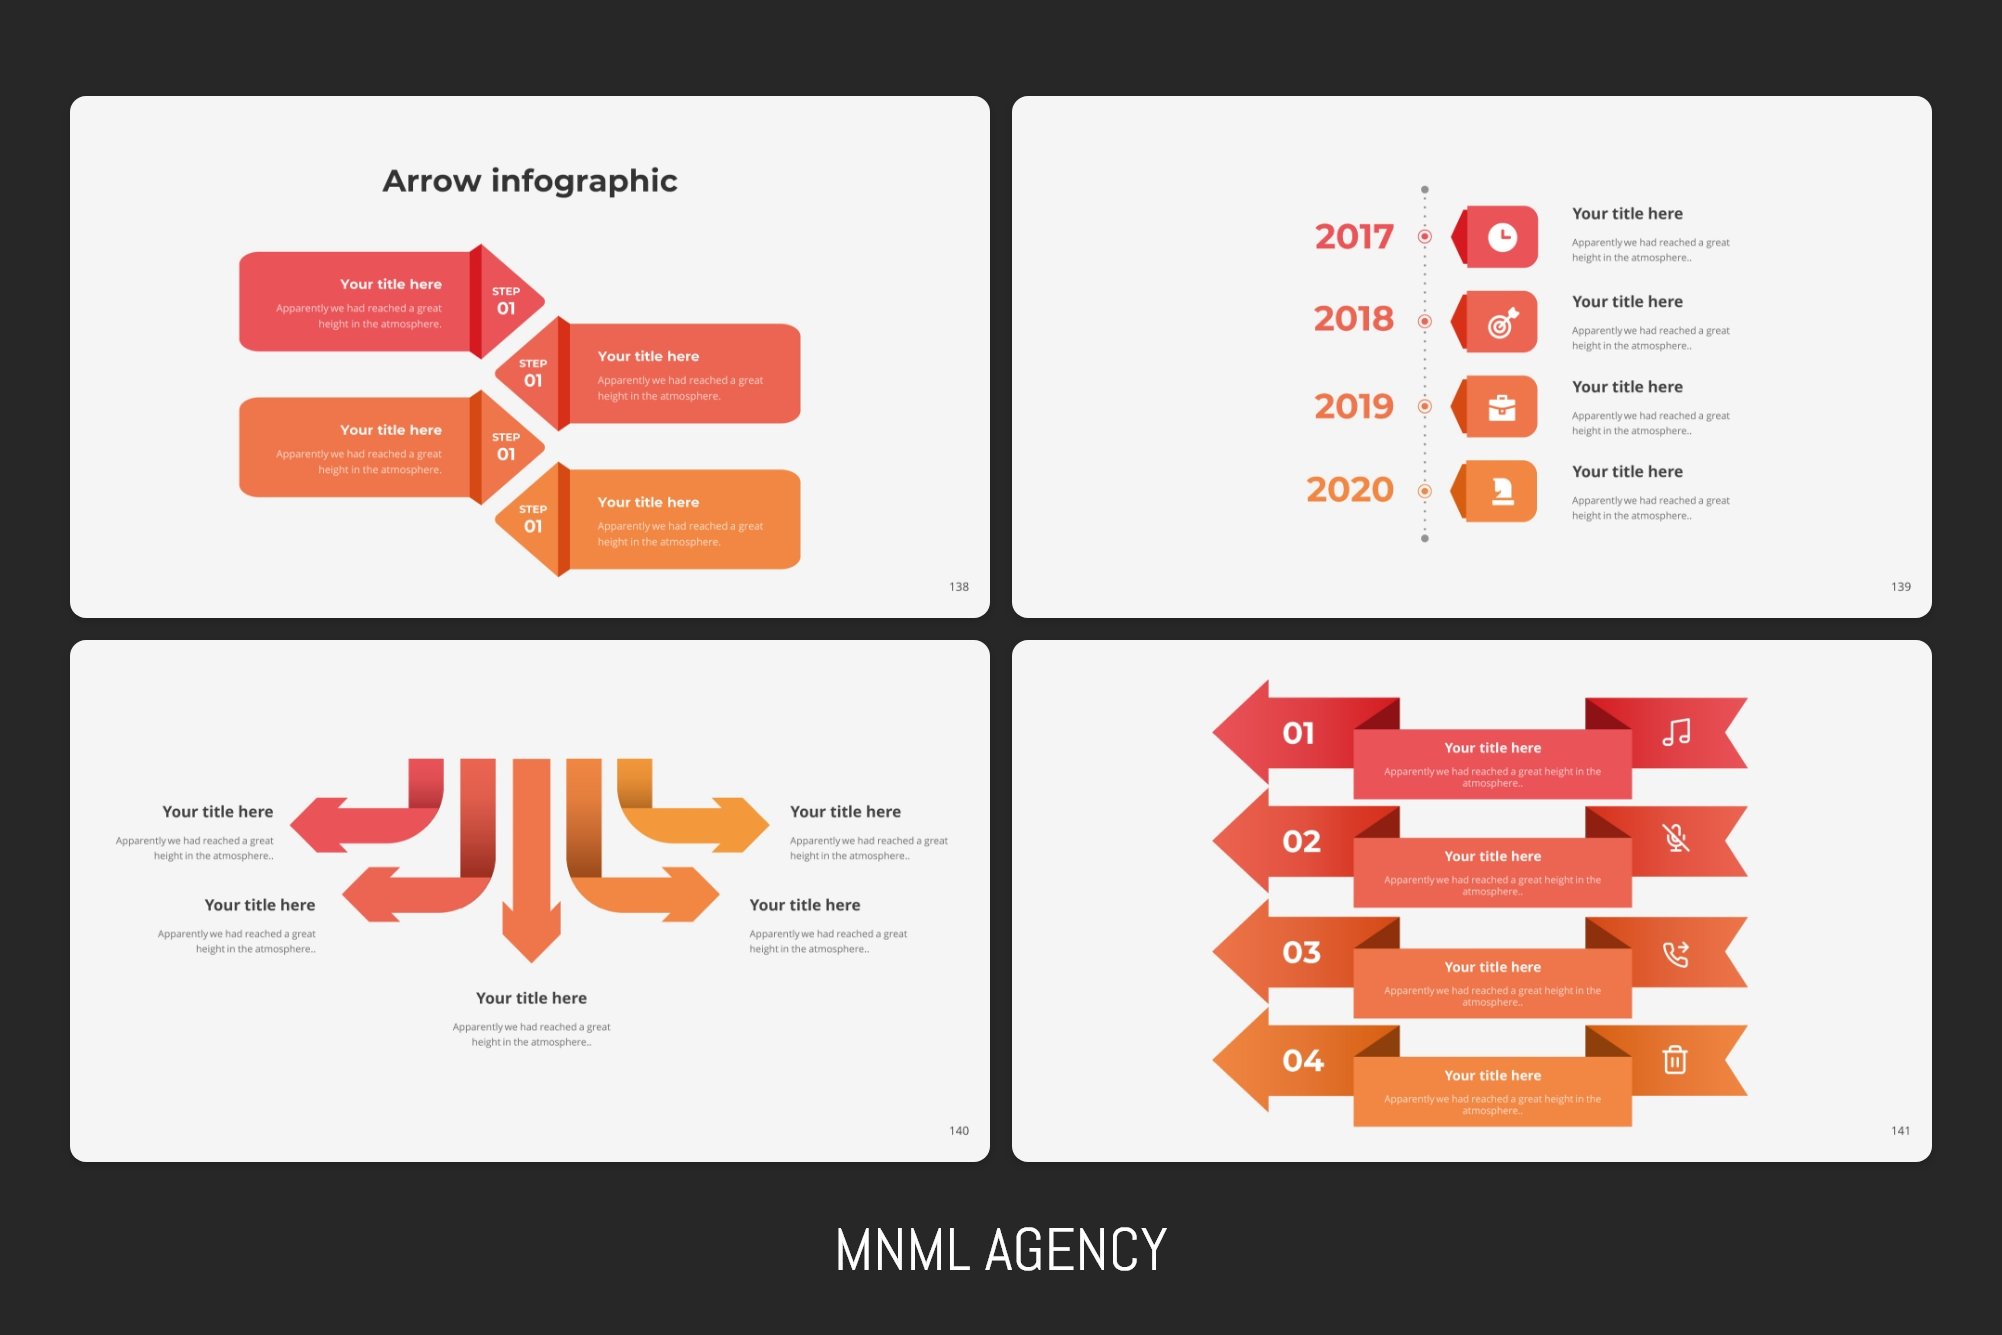 Arrow infographics with chronological information.